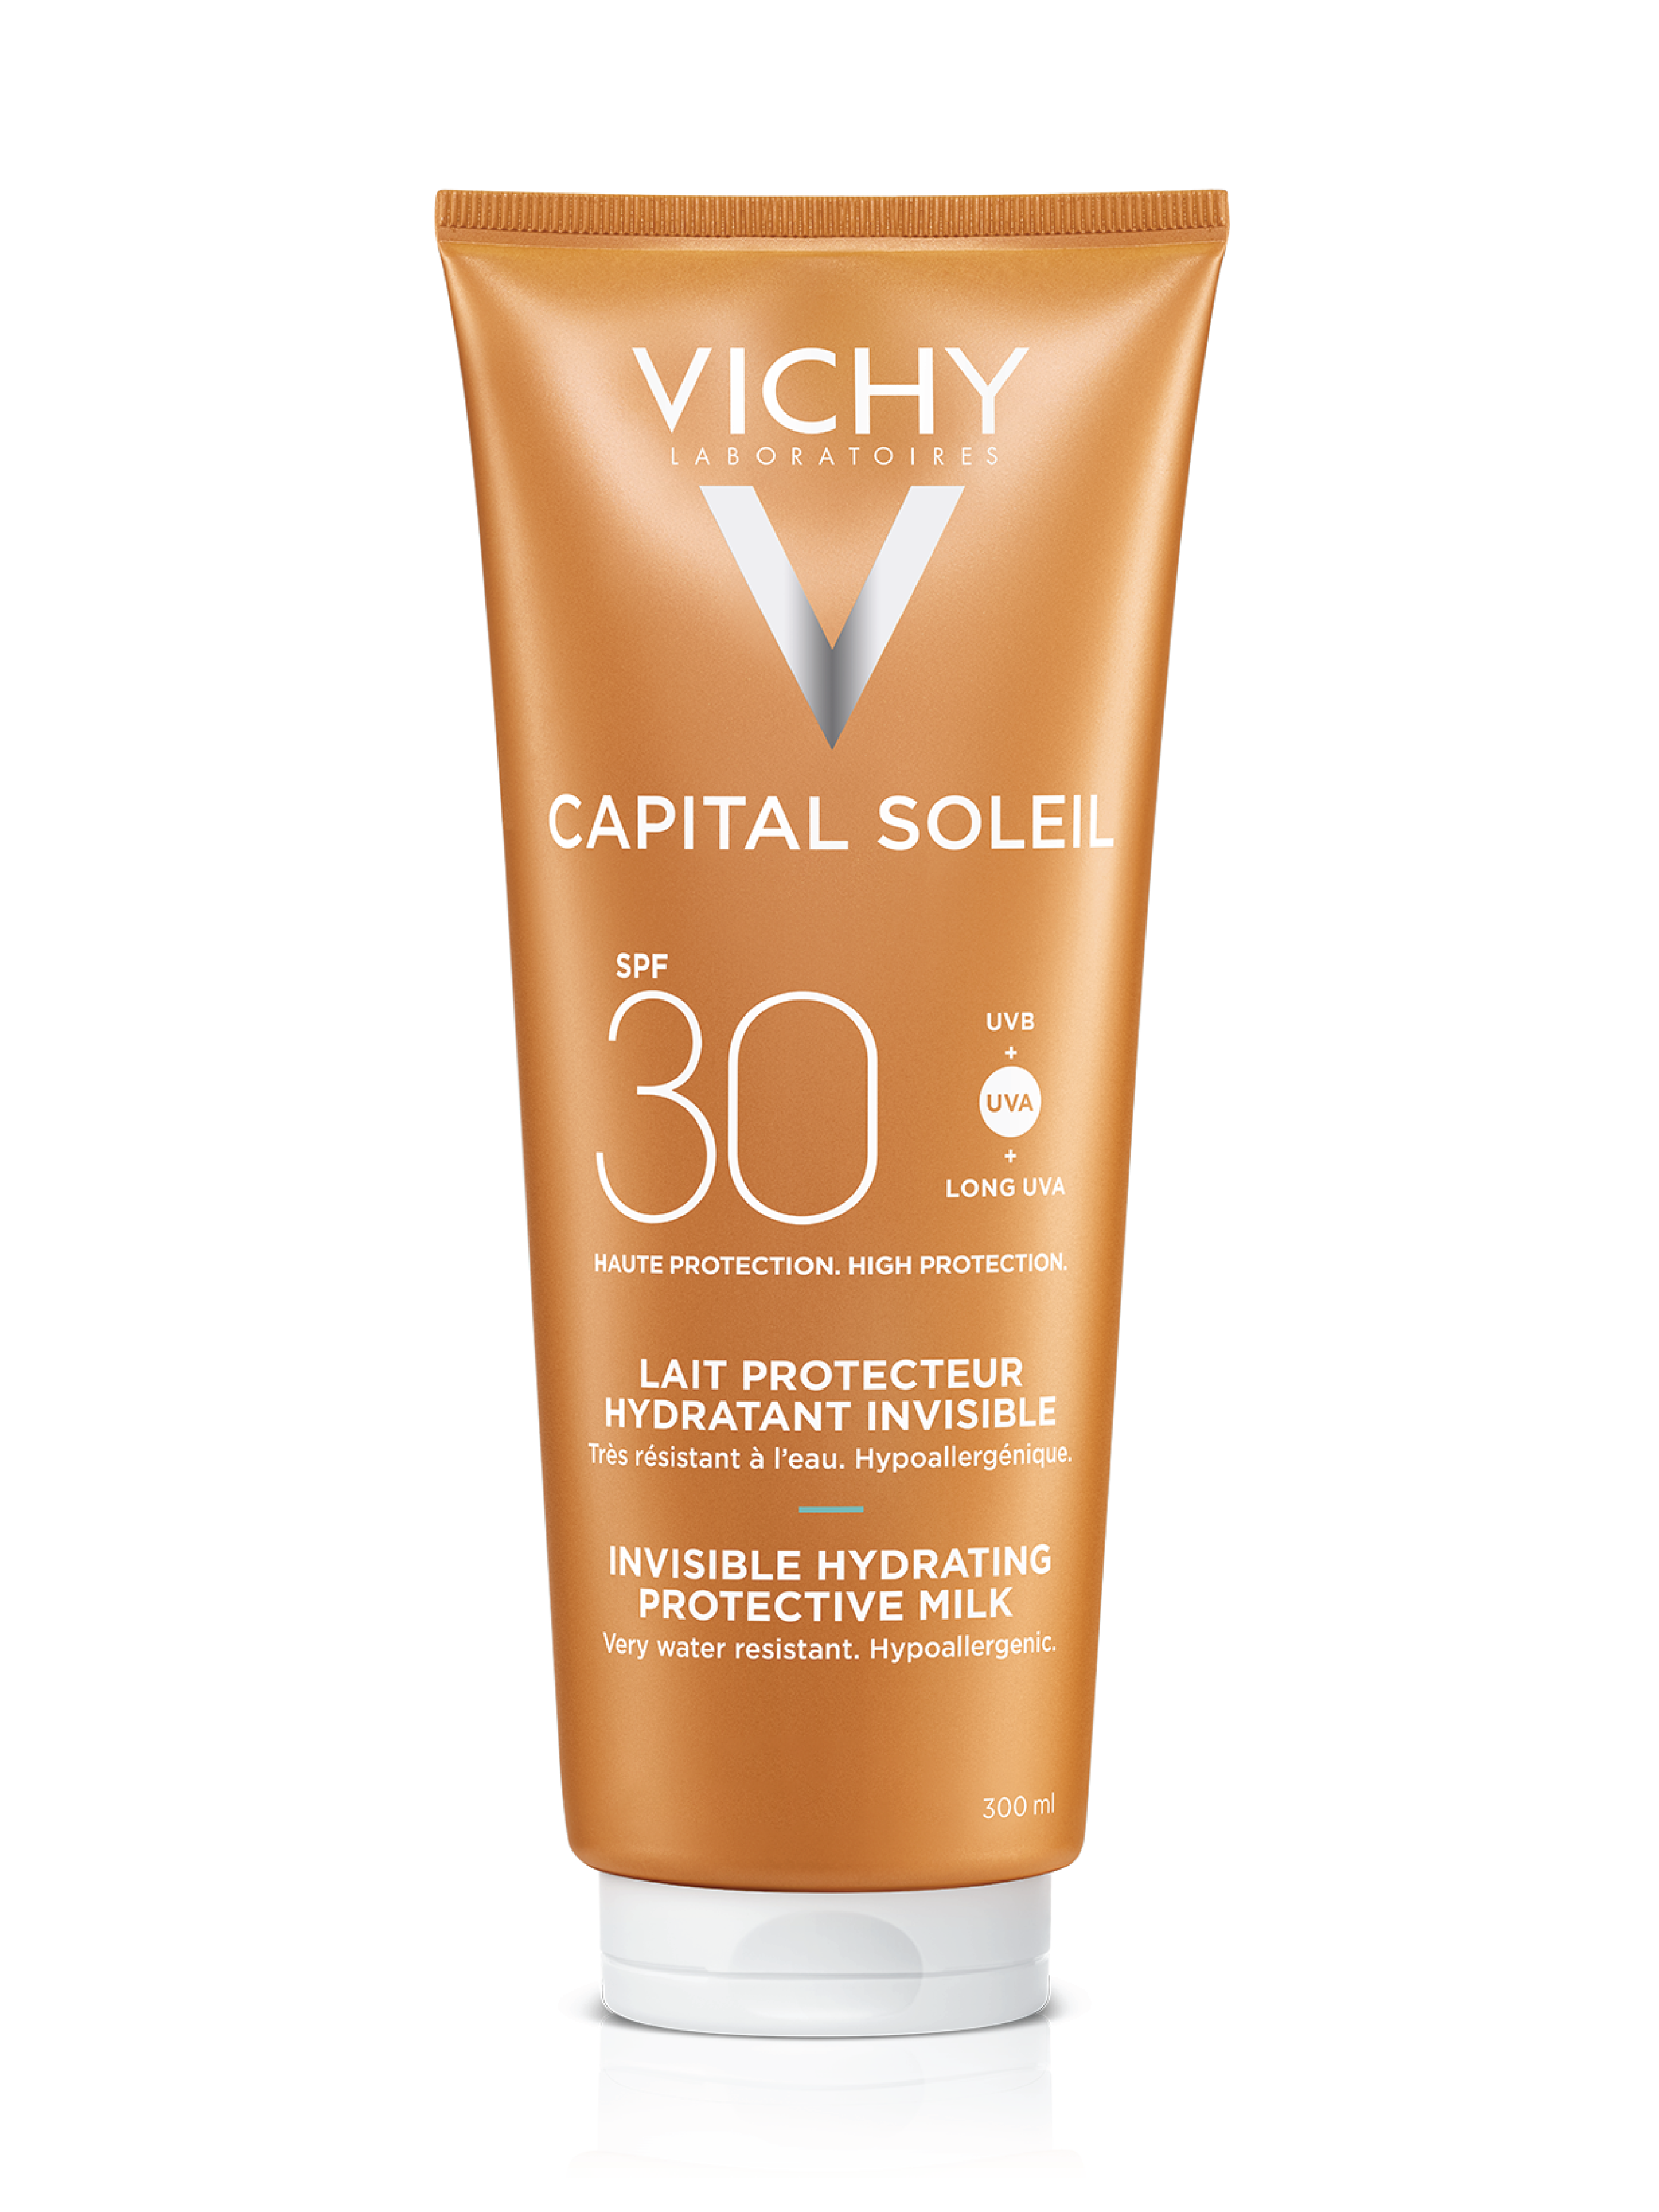 Vichy Capital Soleil Invisible Hydrating Protective Milk SPF30, 300 ml